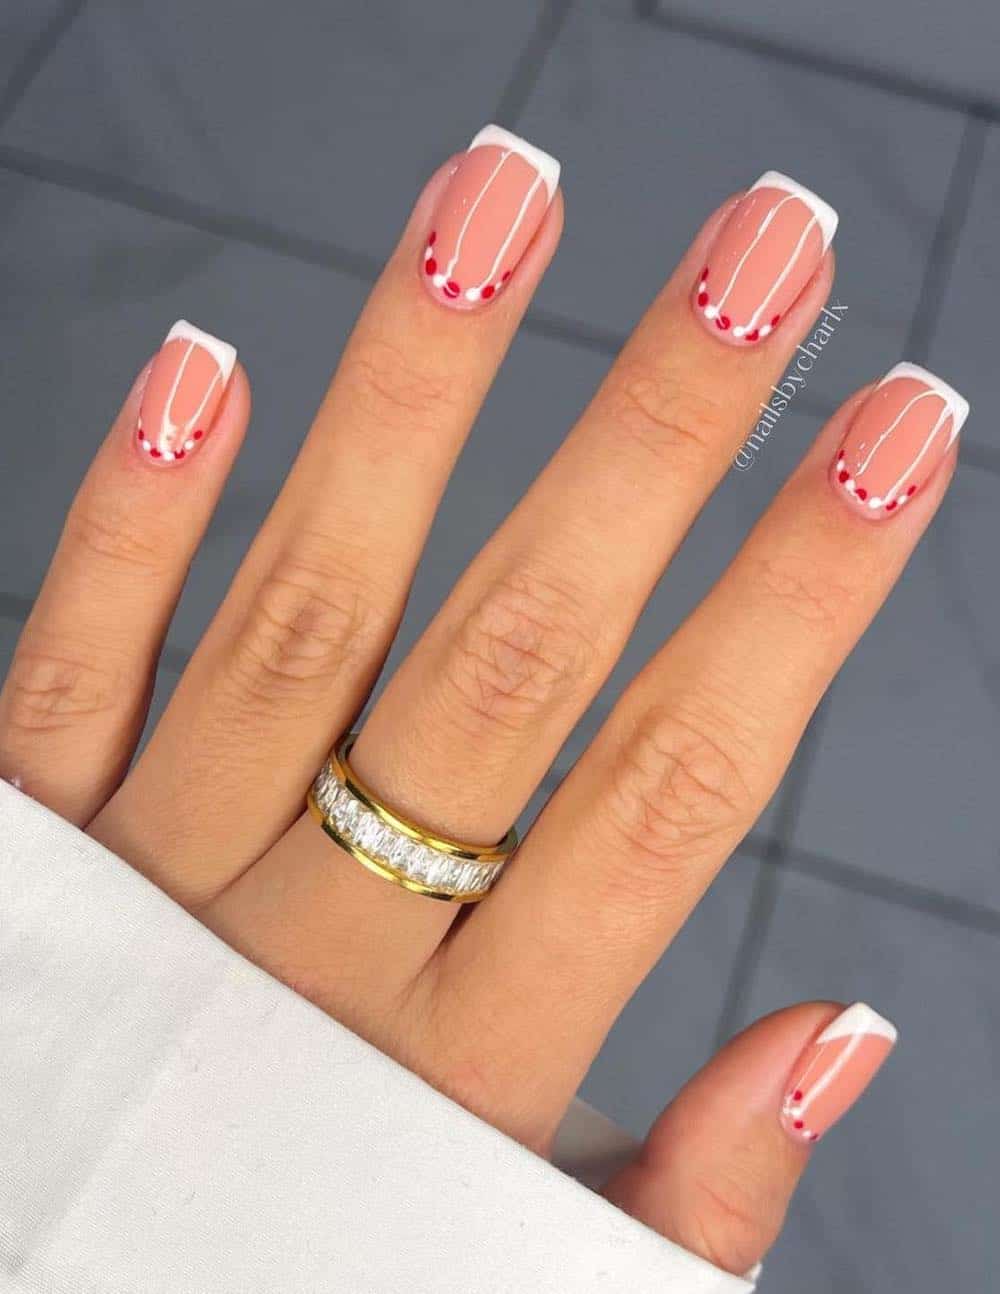 Classic white french tip manicure with red and white dot detail.